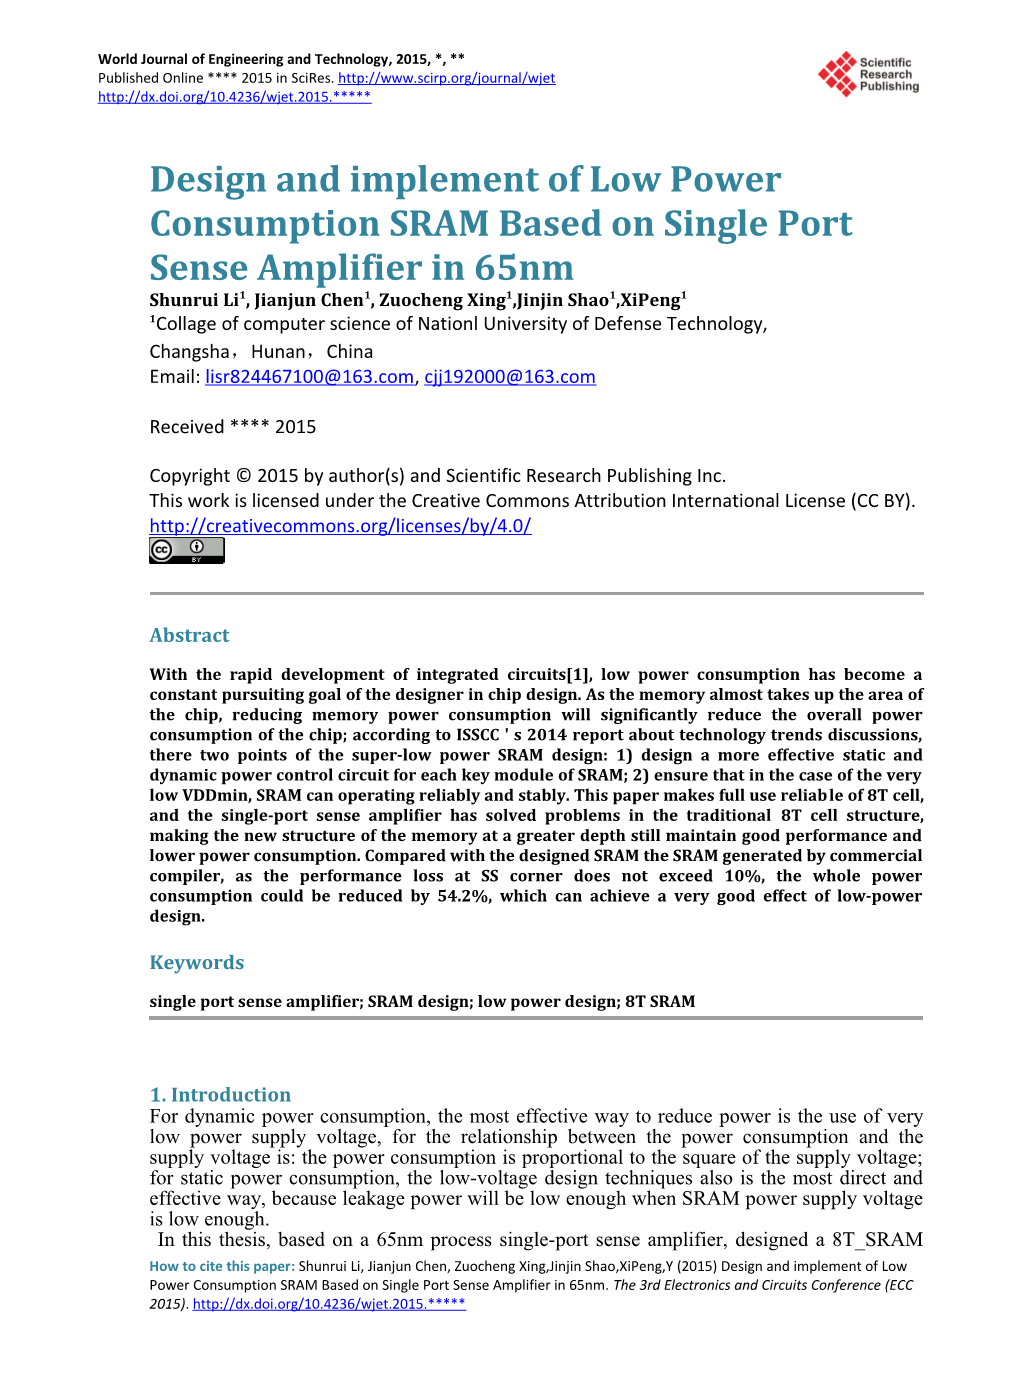 Design and Implement of Low Power Consumptionsram Based on Single Port Senseamplifier in 65Nm